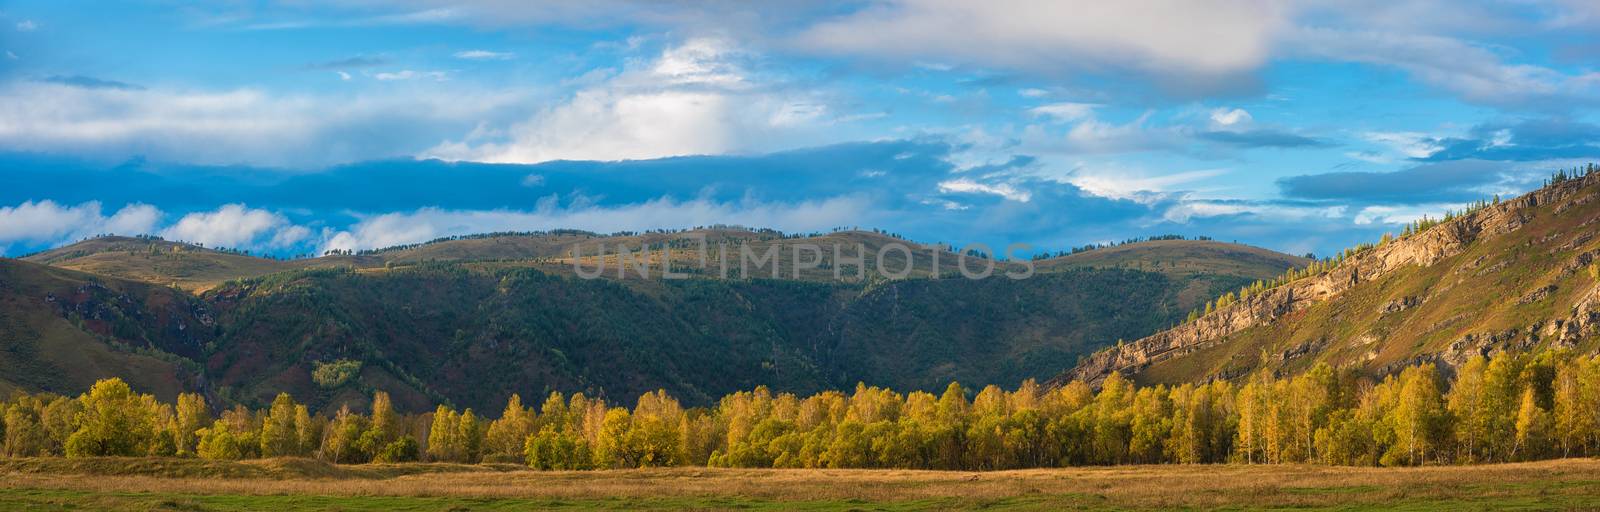 Altay mountains in beauty day, Siberia, Russia